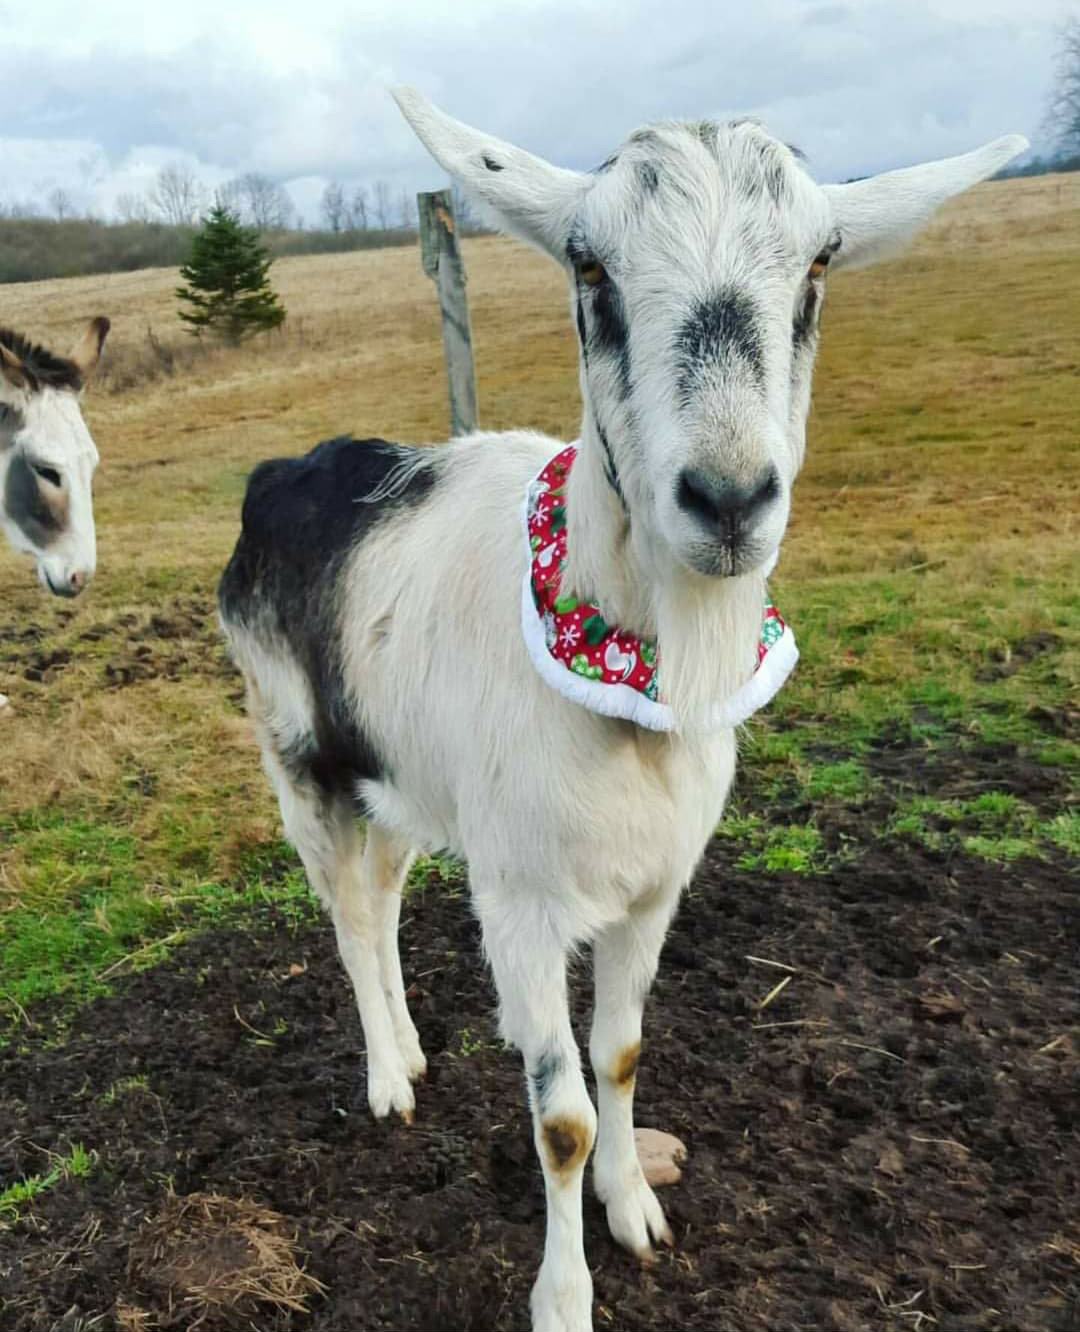 The lovely livestock at Breezy Acres Farm really don’t seem to mind posing with some festive flair around the holidays.